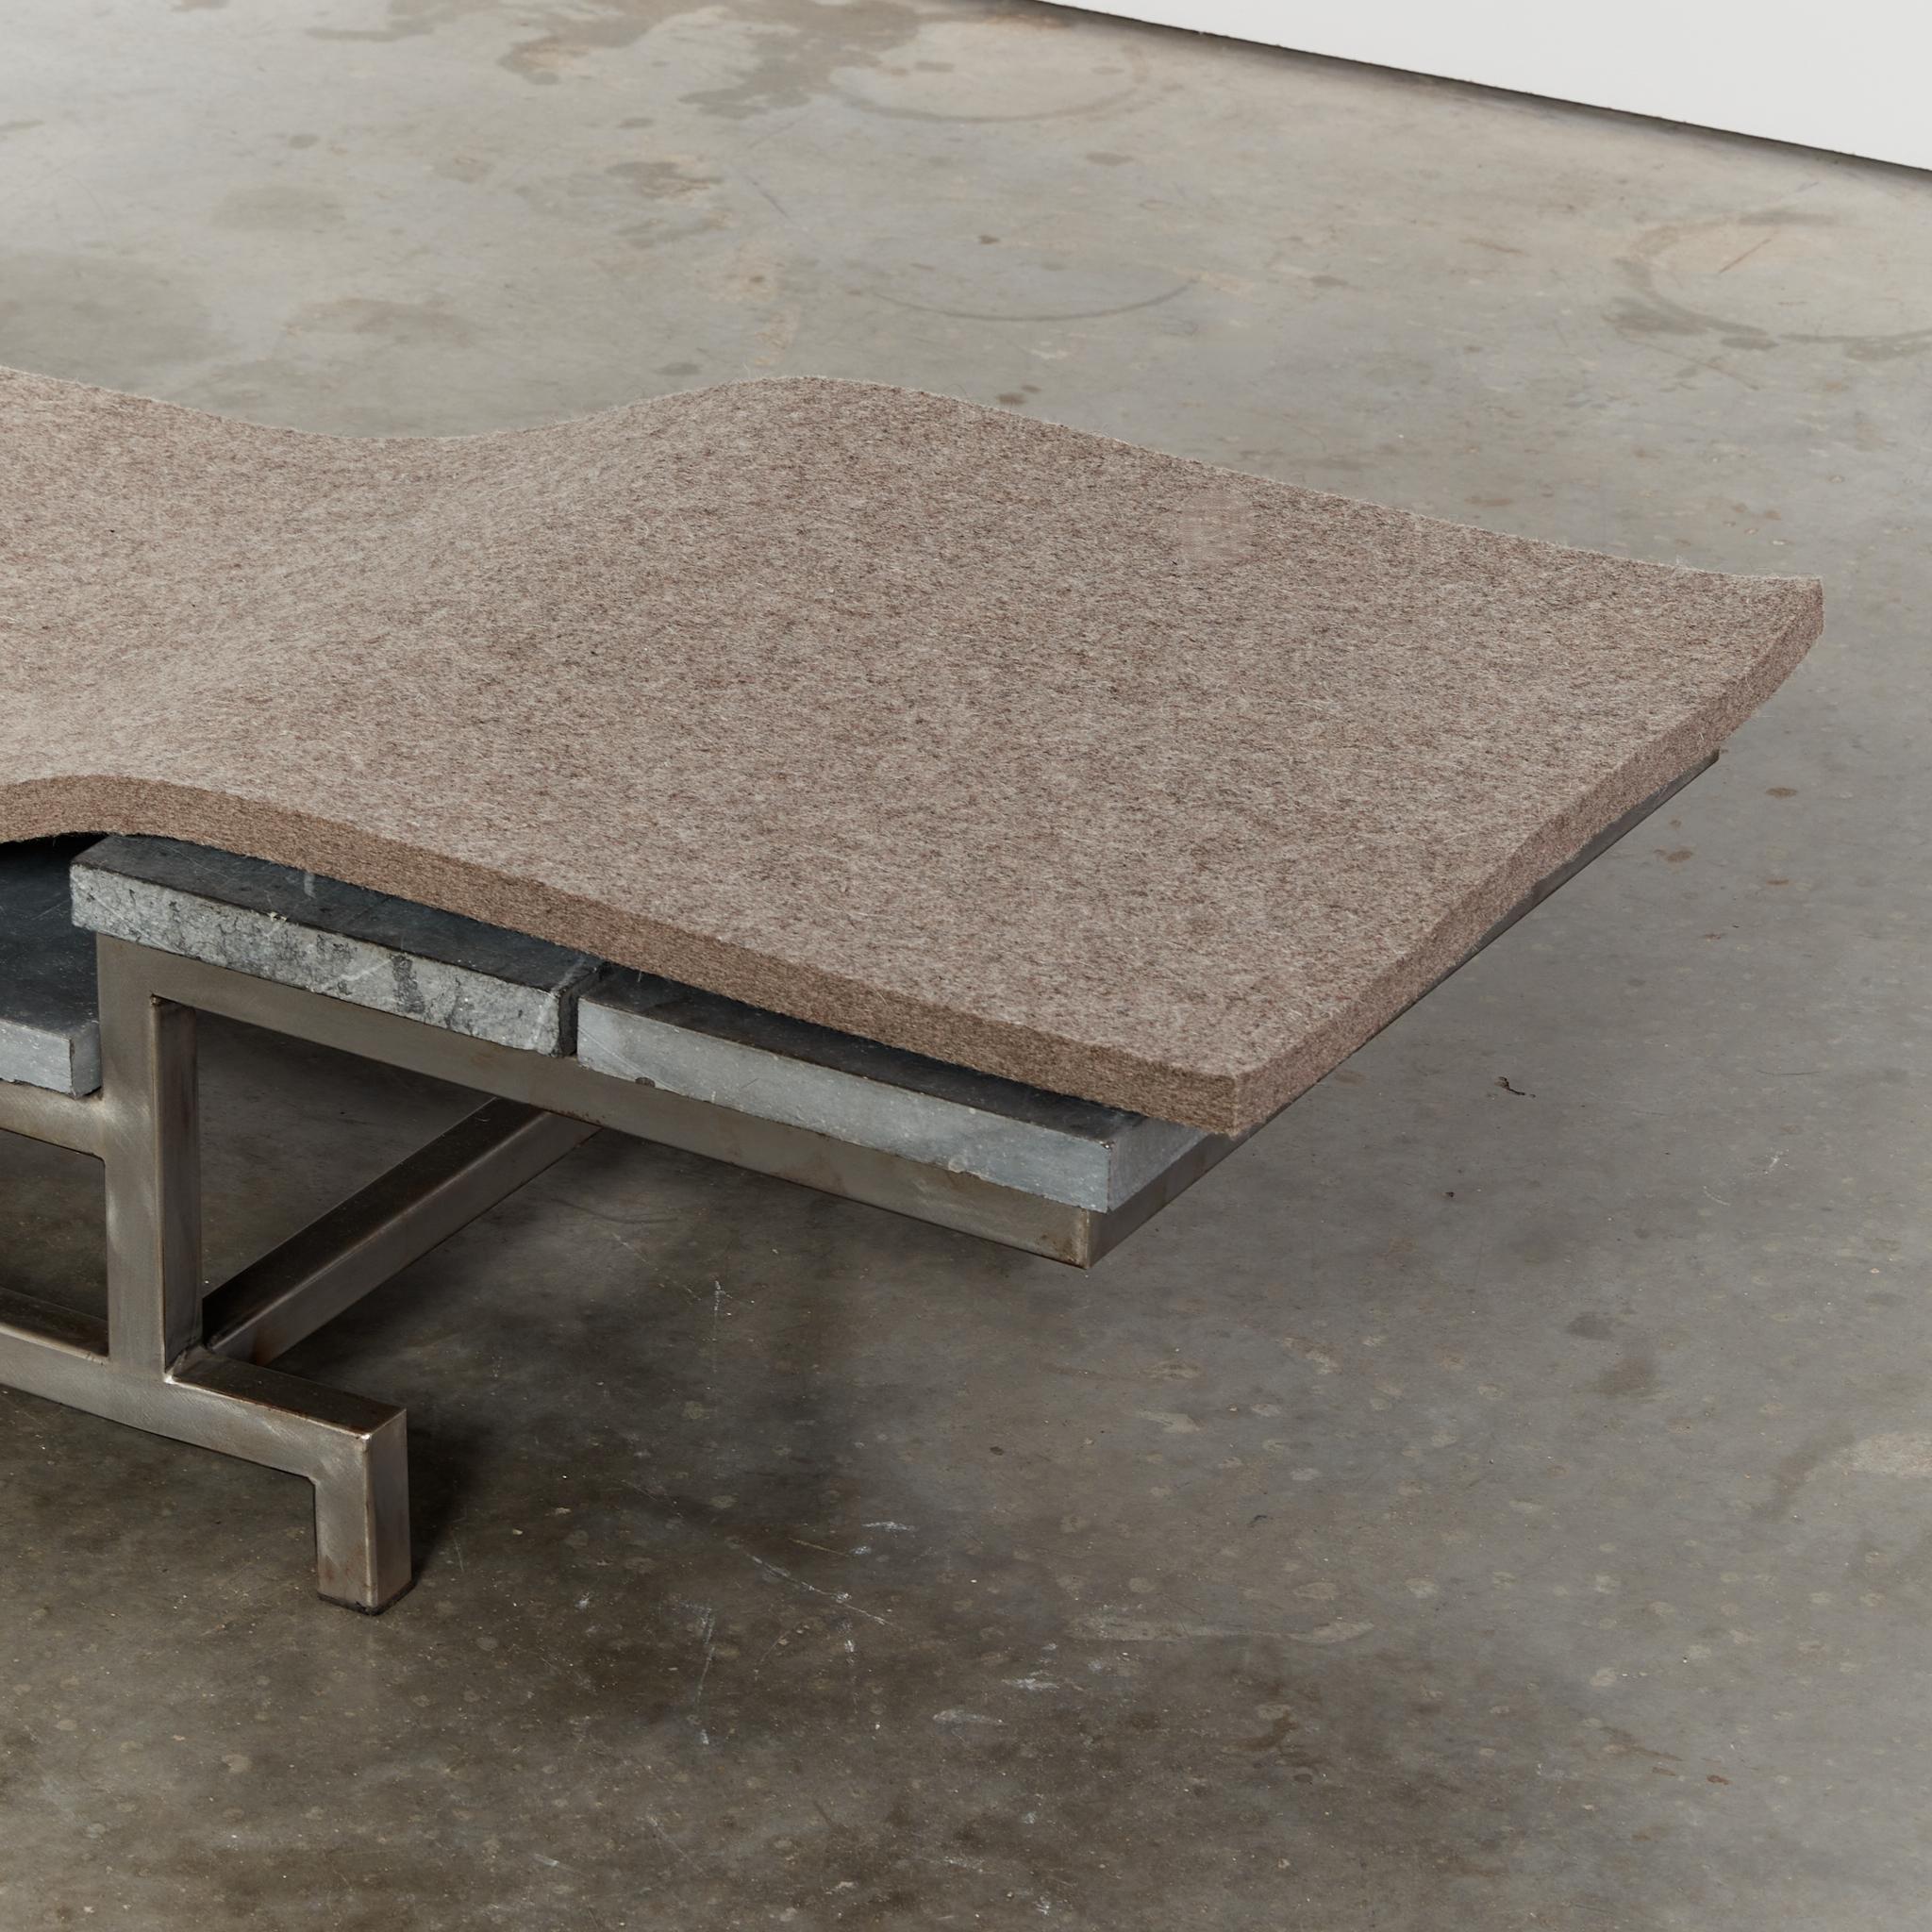 Marble stainless steel and felt daybed by Christoph Siebrasse For Sale 7